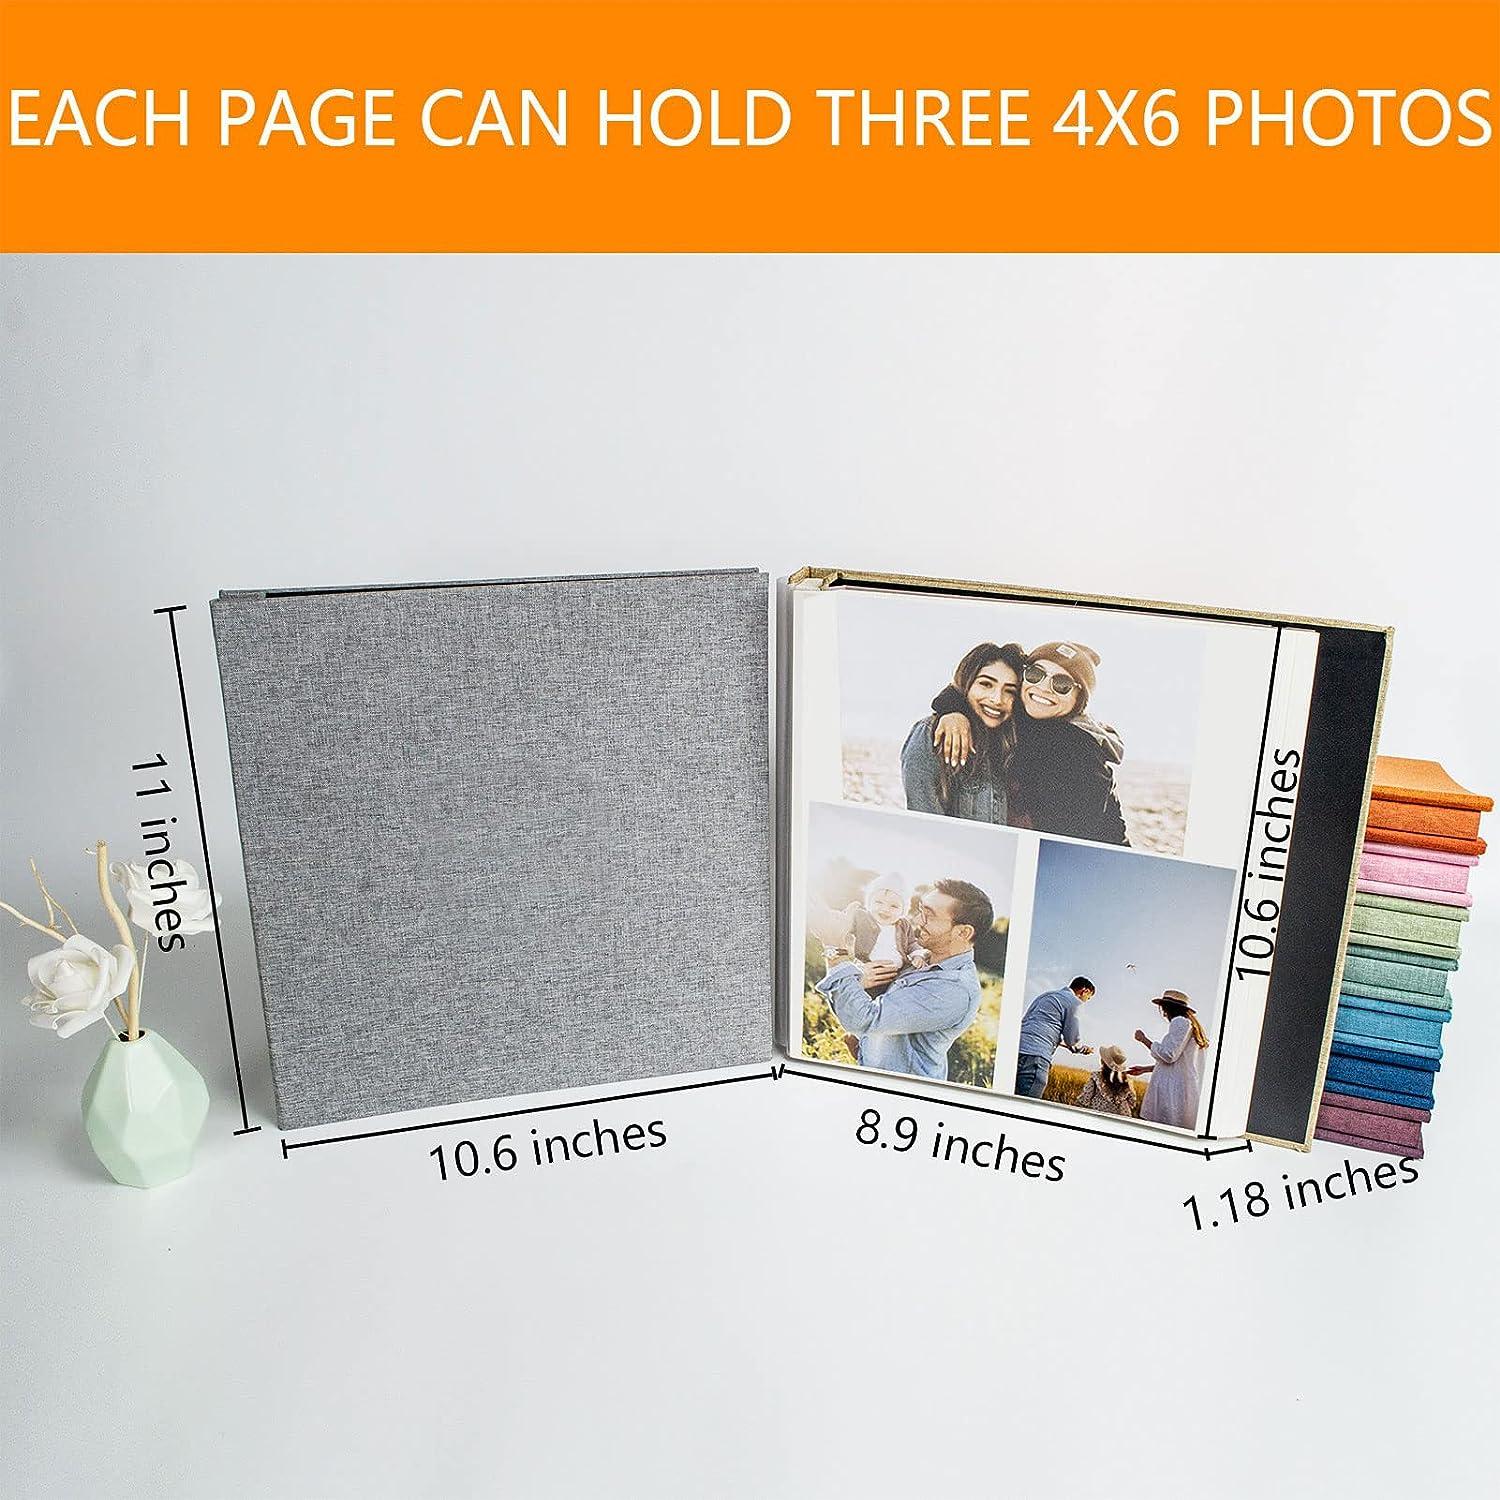  Photo Album Self Adhesive Pages for 4x6 5x7 8x10 Pictures  Scrapbook Magnetic Photo Albums with Sticky Pages Books with A Metallic Pen  for Baby Wedding Family 11x10.6 LightBlue 60 Pages 